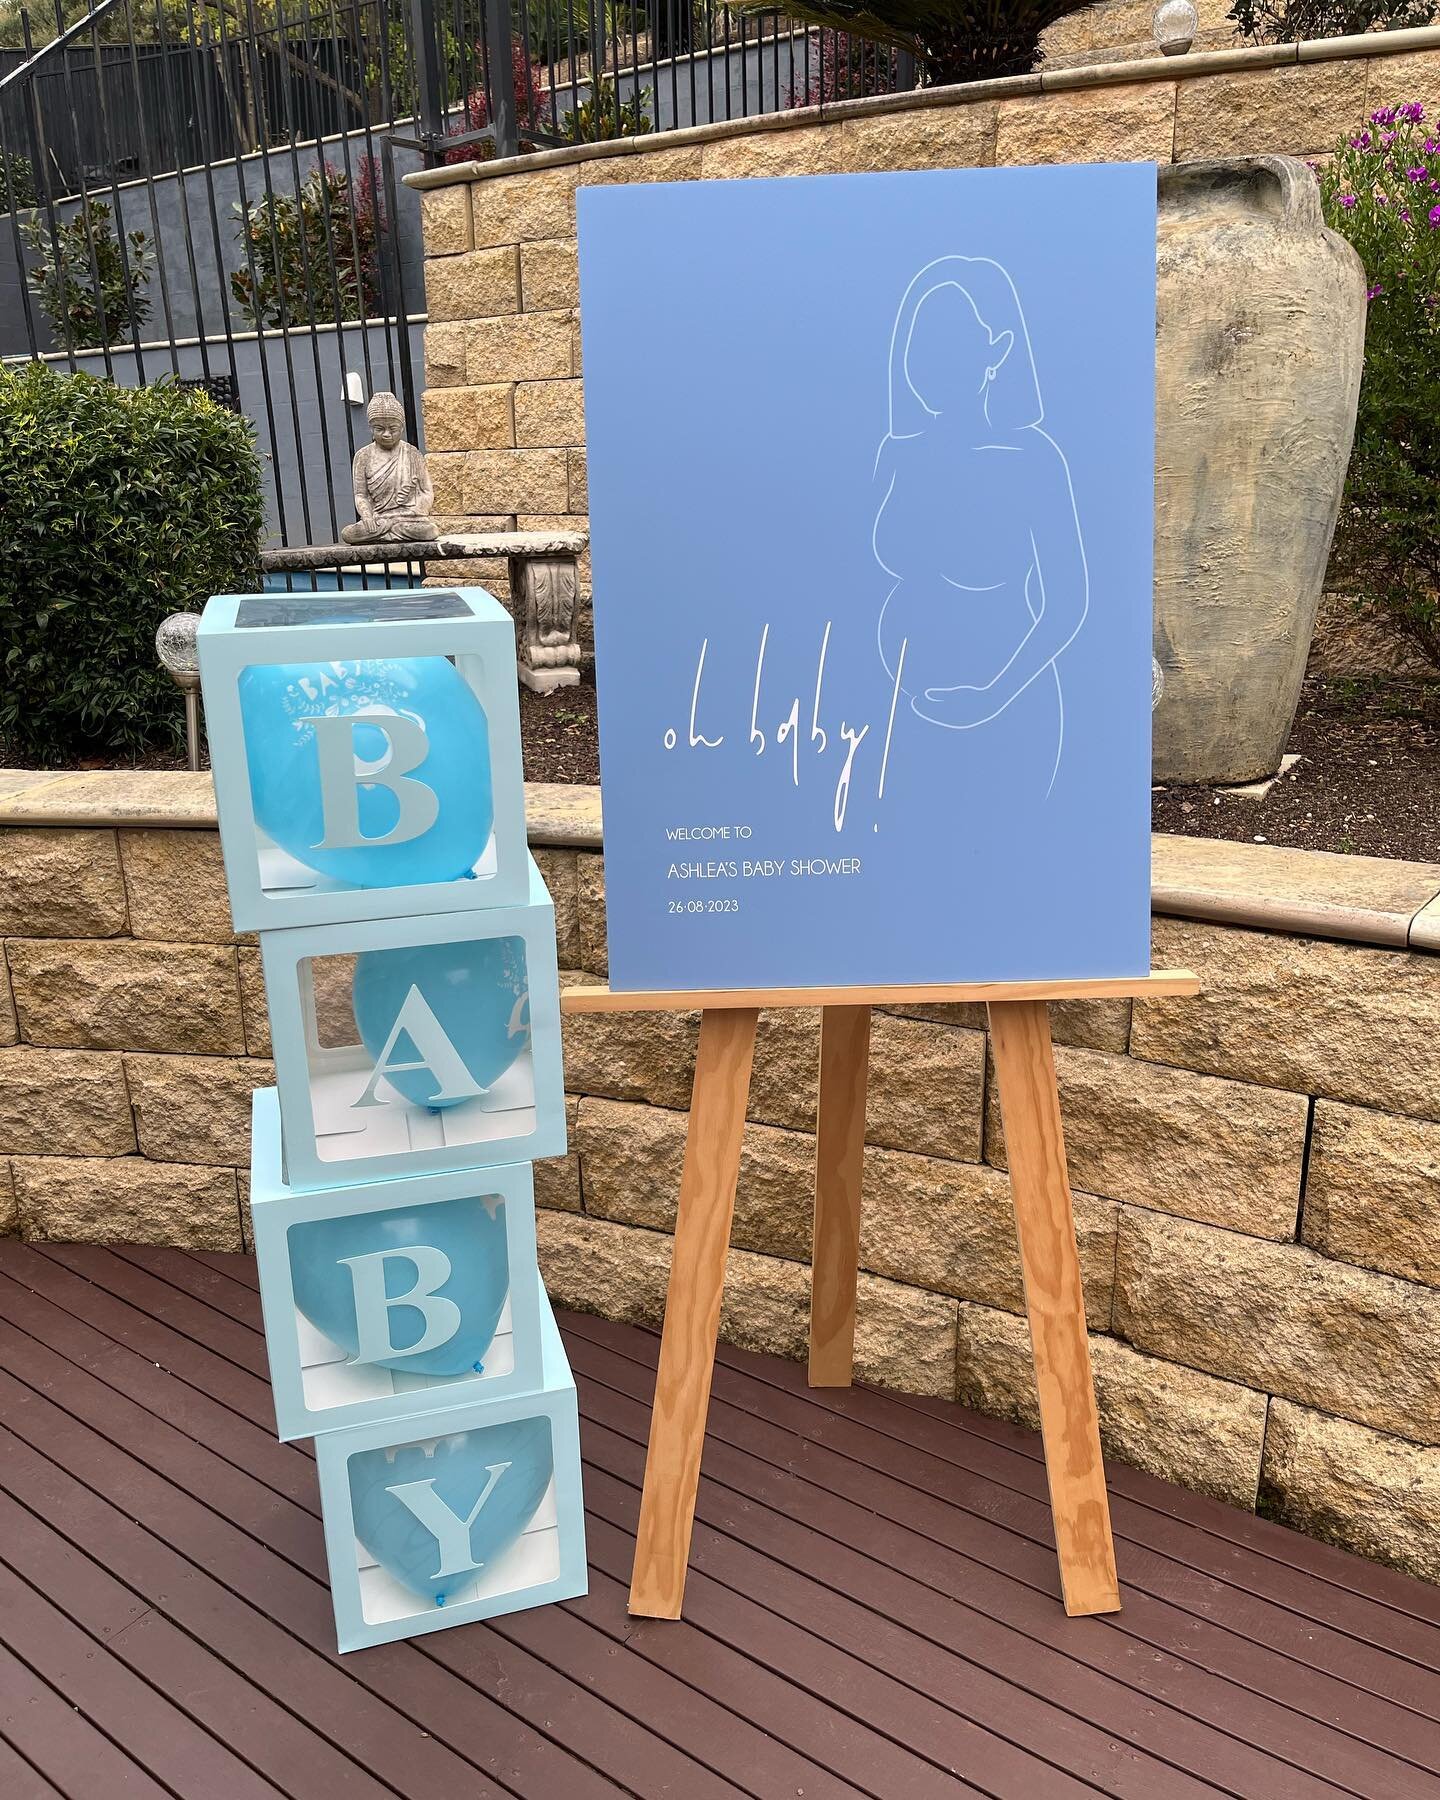 Oh baby! What a fun little project to work on! 🥰

Ashlea was after a minimal welcome sign for her baby shower, including soft shades of blue, a simple illustration with only the essential information included as text 🧸

She provided me with a photo